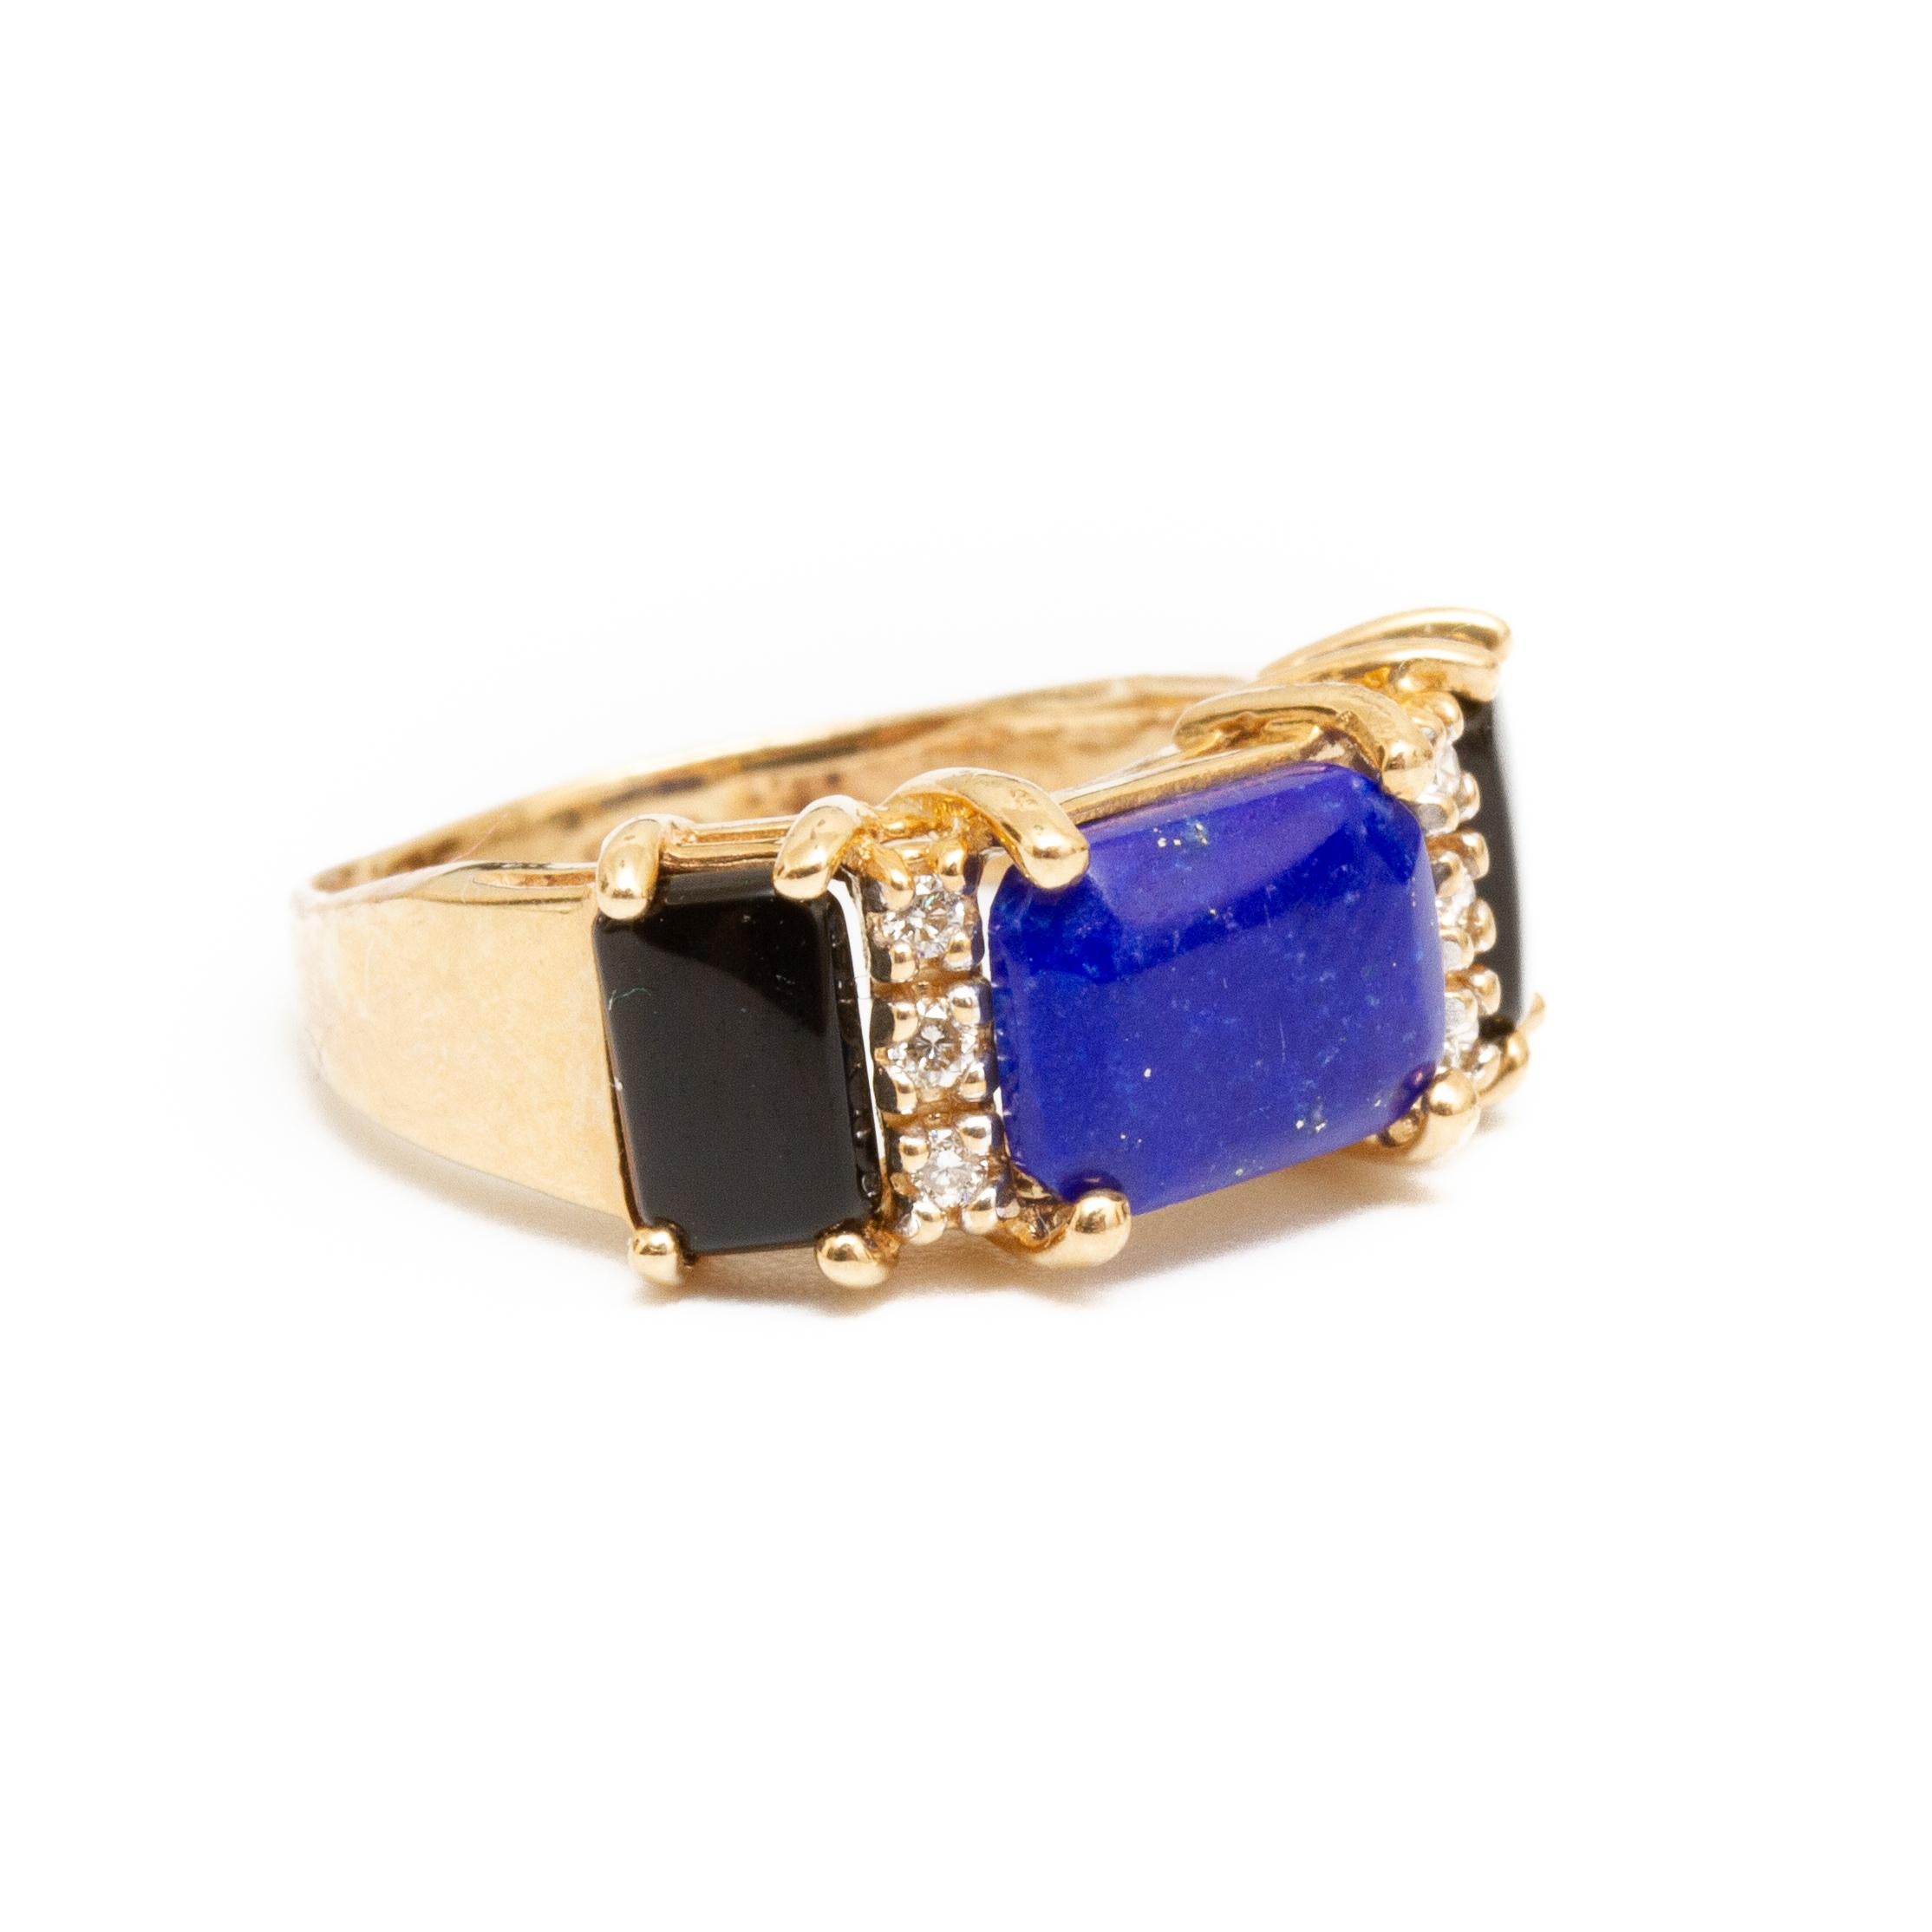 18k gold lapis, onyx and diamond ring size 5.5. 1.7dwt From the Broussard estate noted jewelry collection Park Avenue New York